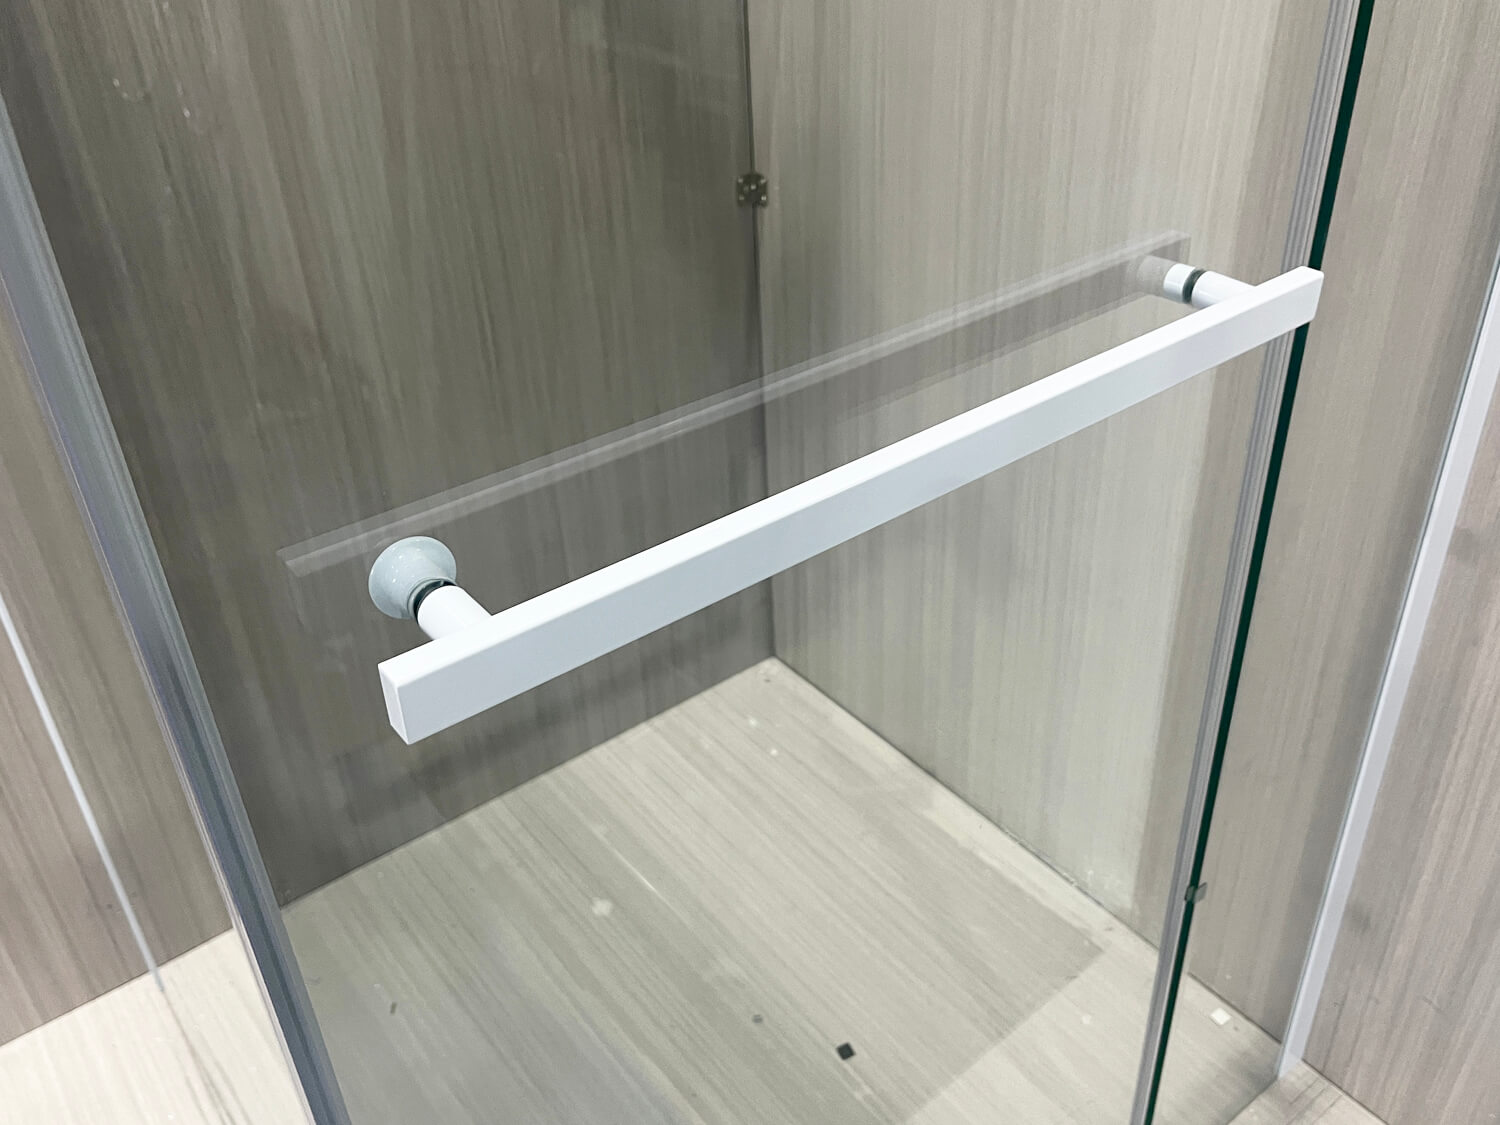 Square White Shower Enclosure With Pivot Door - 900 x 900 x 1850mm